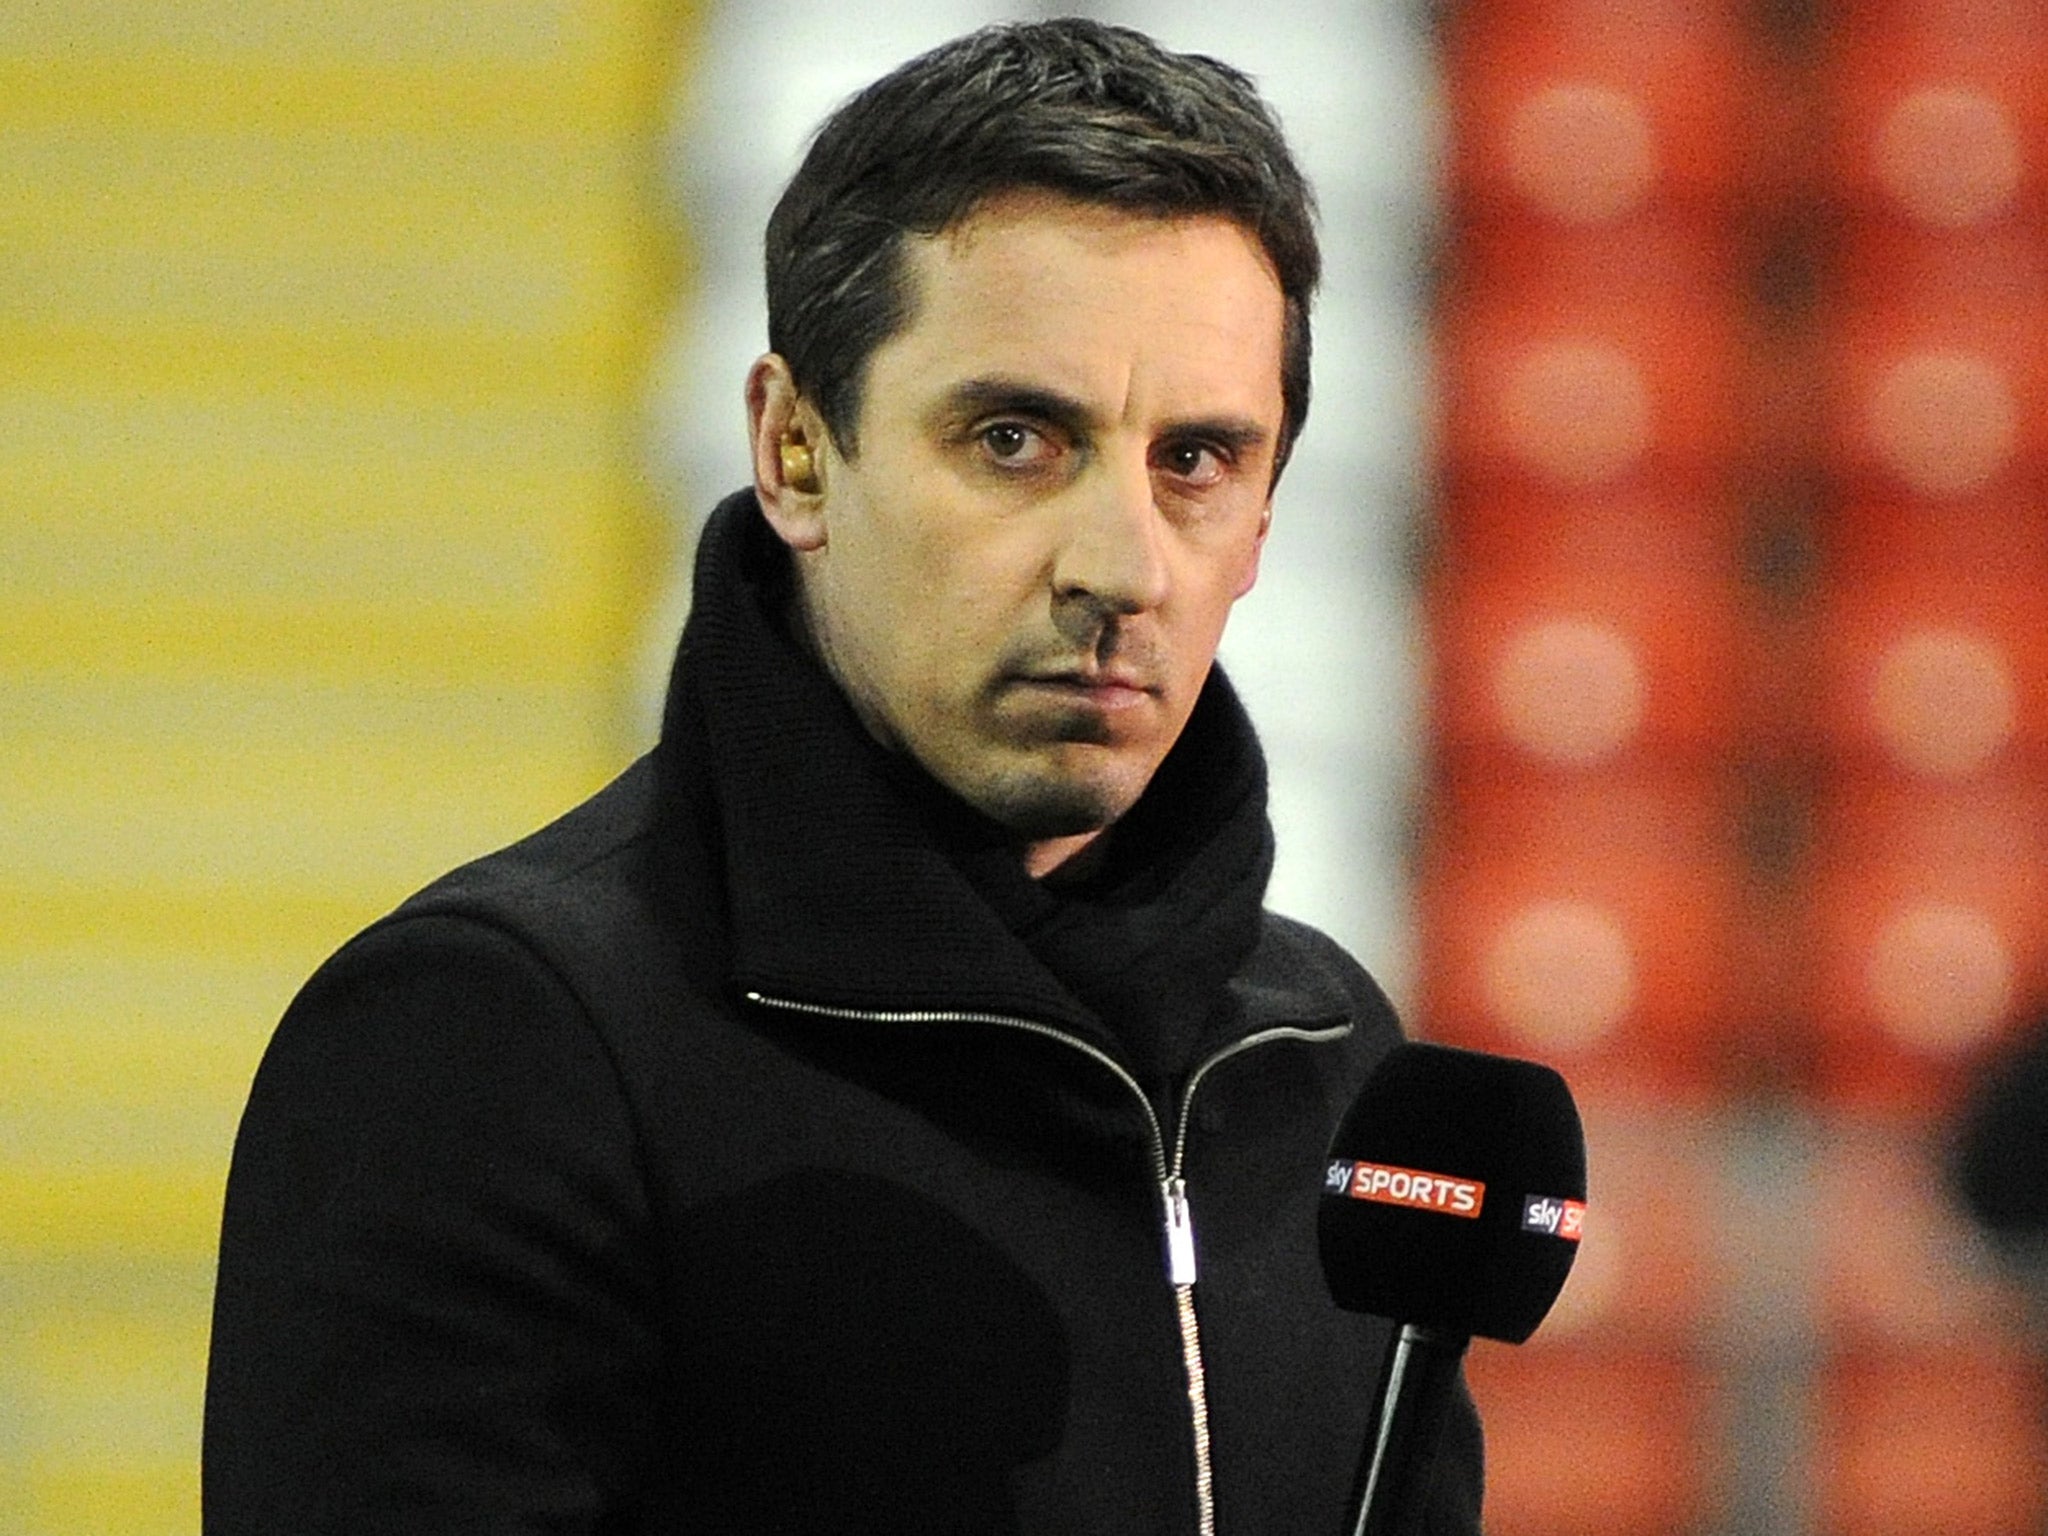 Gary Neville appeared to take a swipe at Liverpool fans for taking a picture of Jose Mourinho